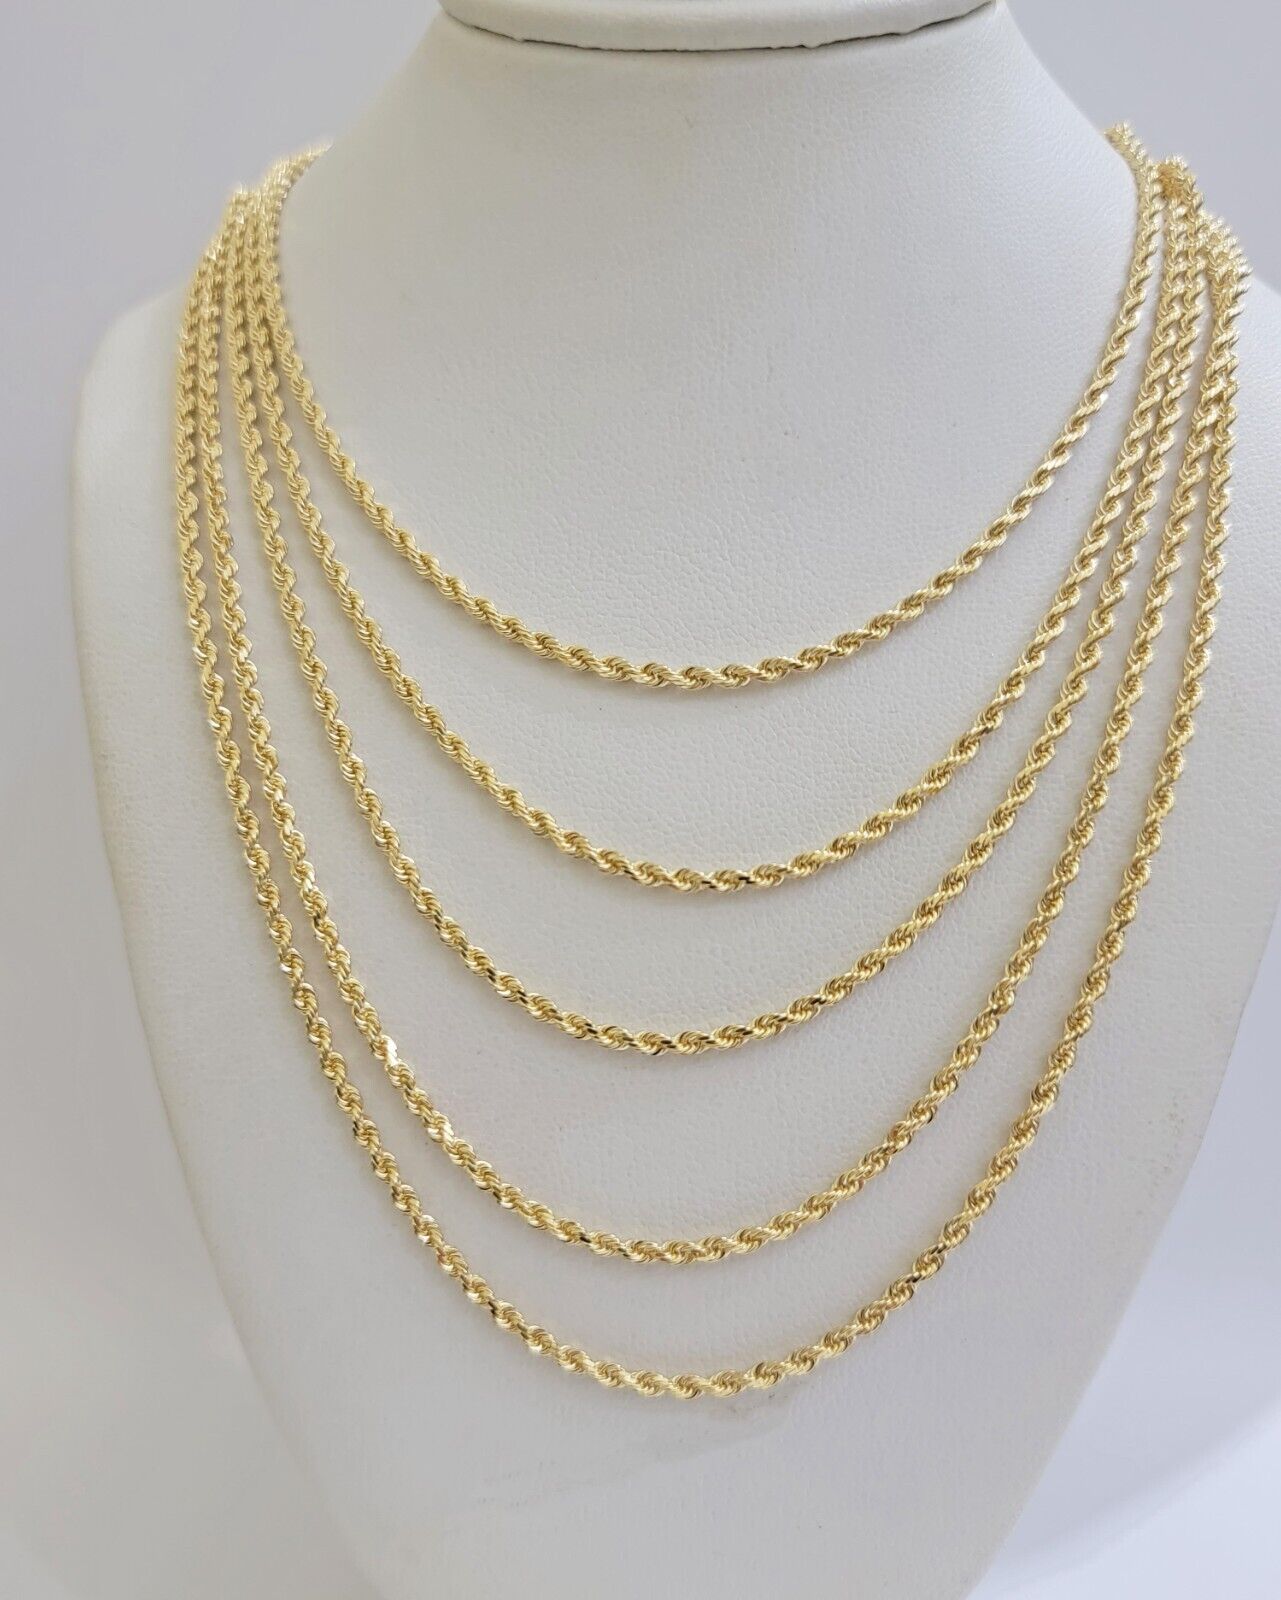 Real 18k Yellow Gold Rope Chain Necklace 22 Inch 2mm Solid 18 KT Men Women, SALE